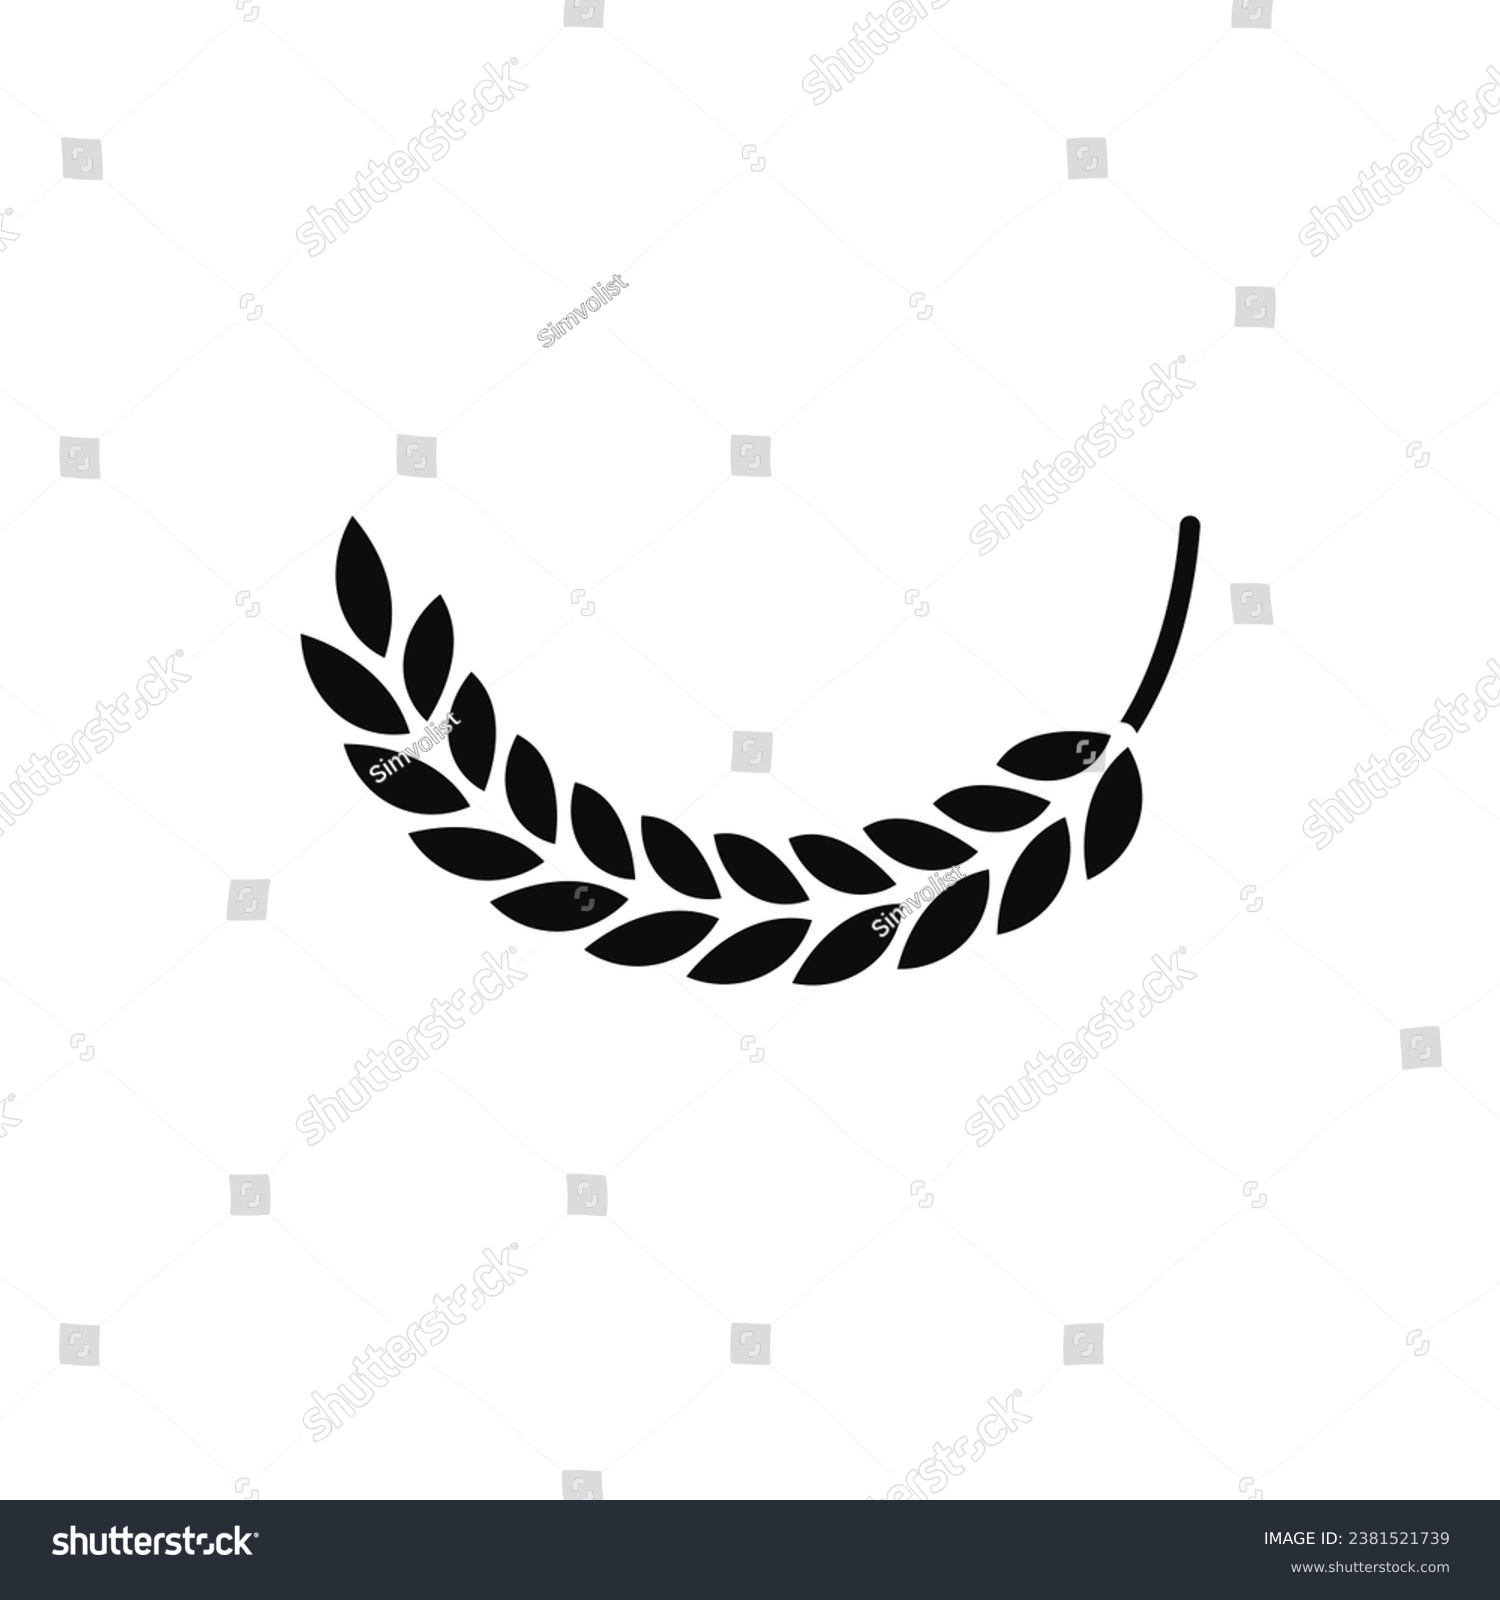 SVG of Silhouette of bent spikelet. A semicircular curved shape. svg